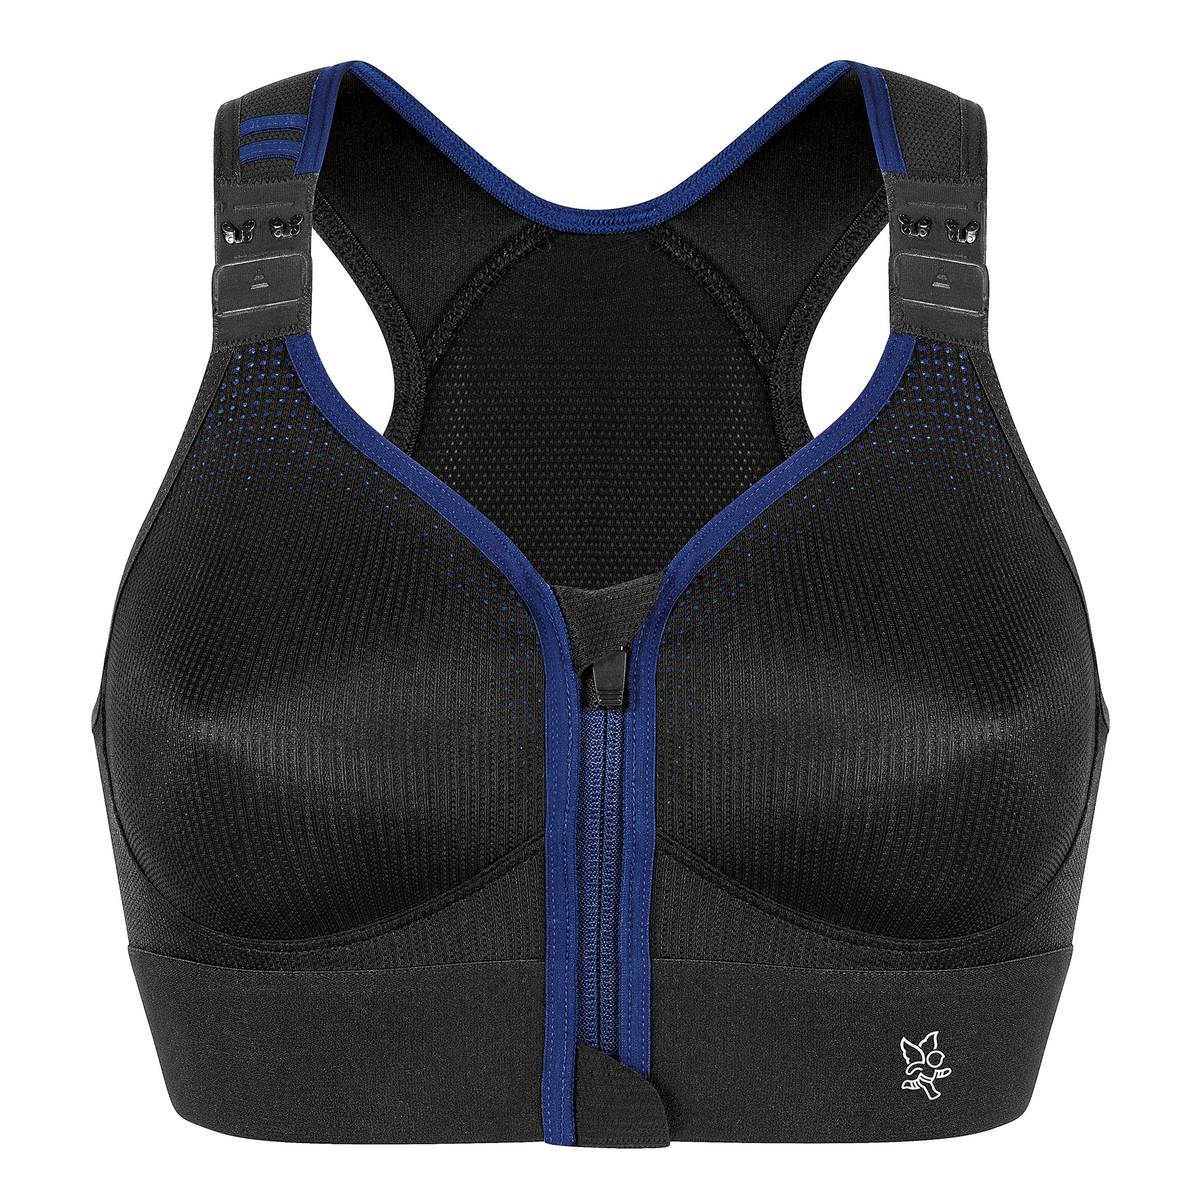 Eazip Sports Bra with Extreme Support